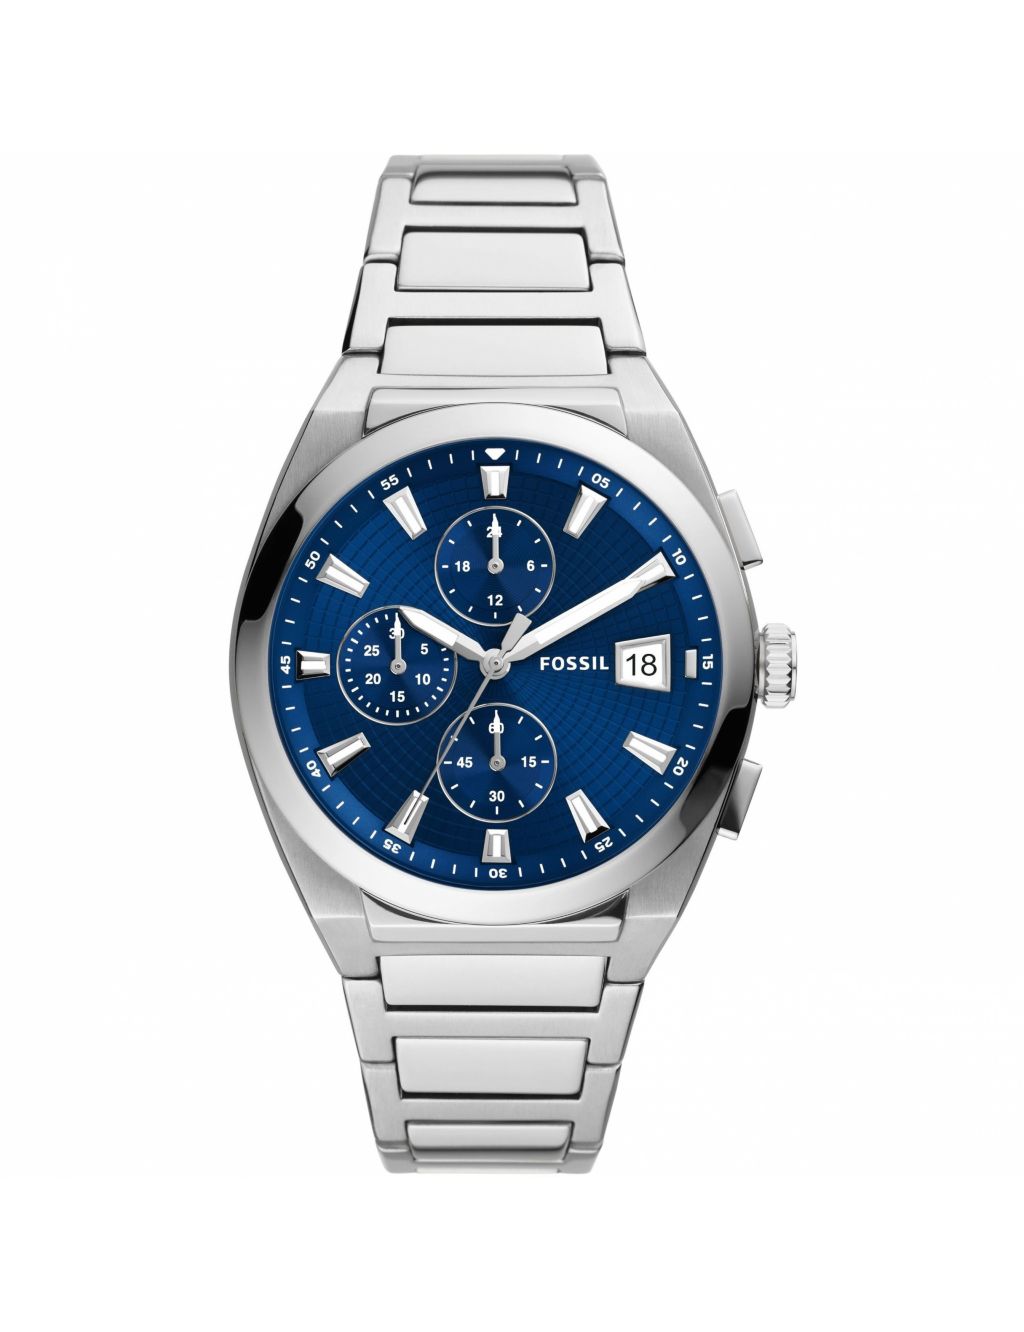 Fossil Everett Stainless Steel Chronograph Watch image 1